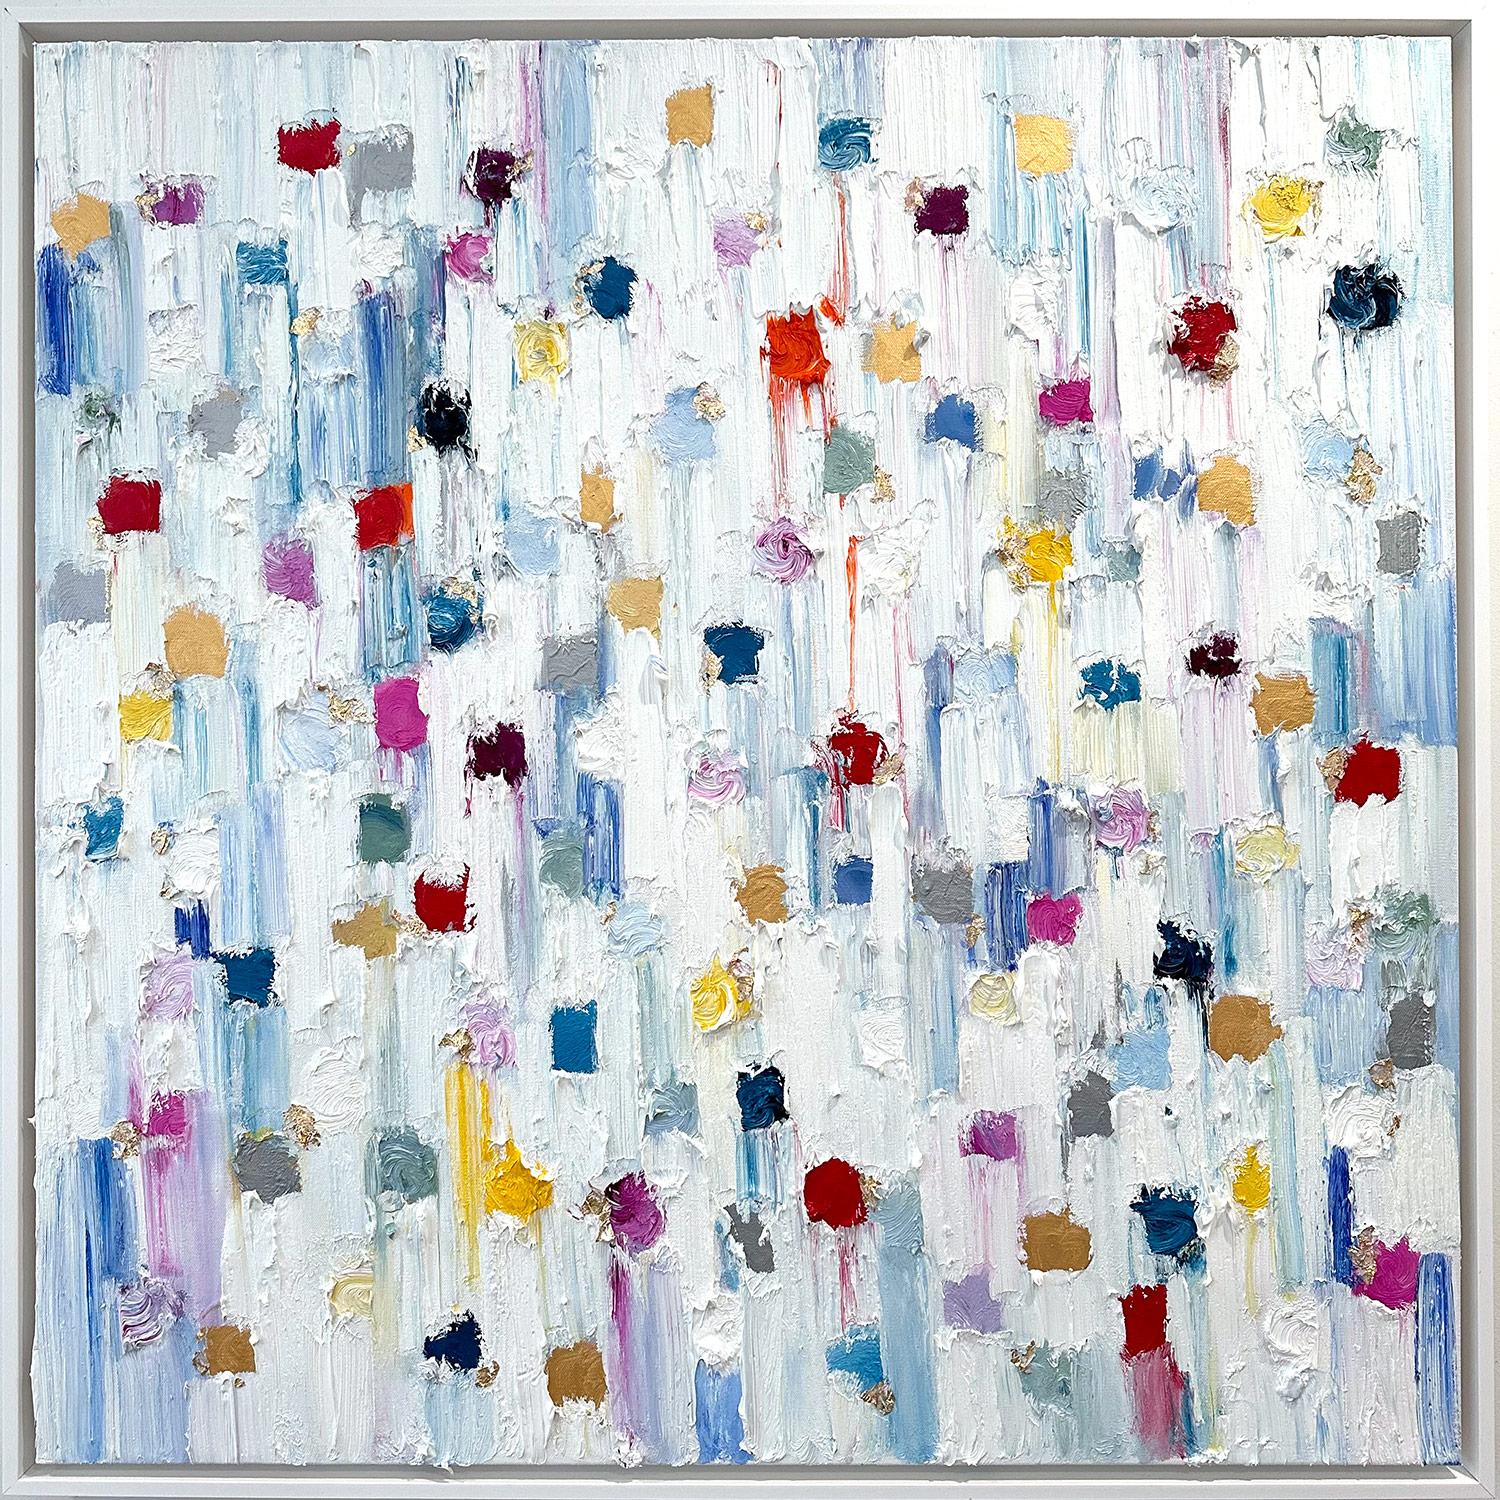 Cindy Shaoul Abstract Painting – "Dripping Dots - Cannes" Multicolor Contemporary Ölgemälde auf Leinwand gerahmt